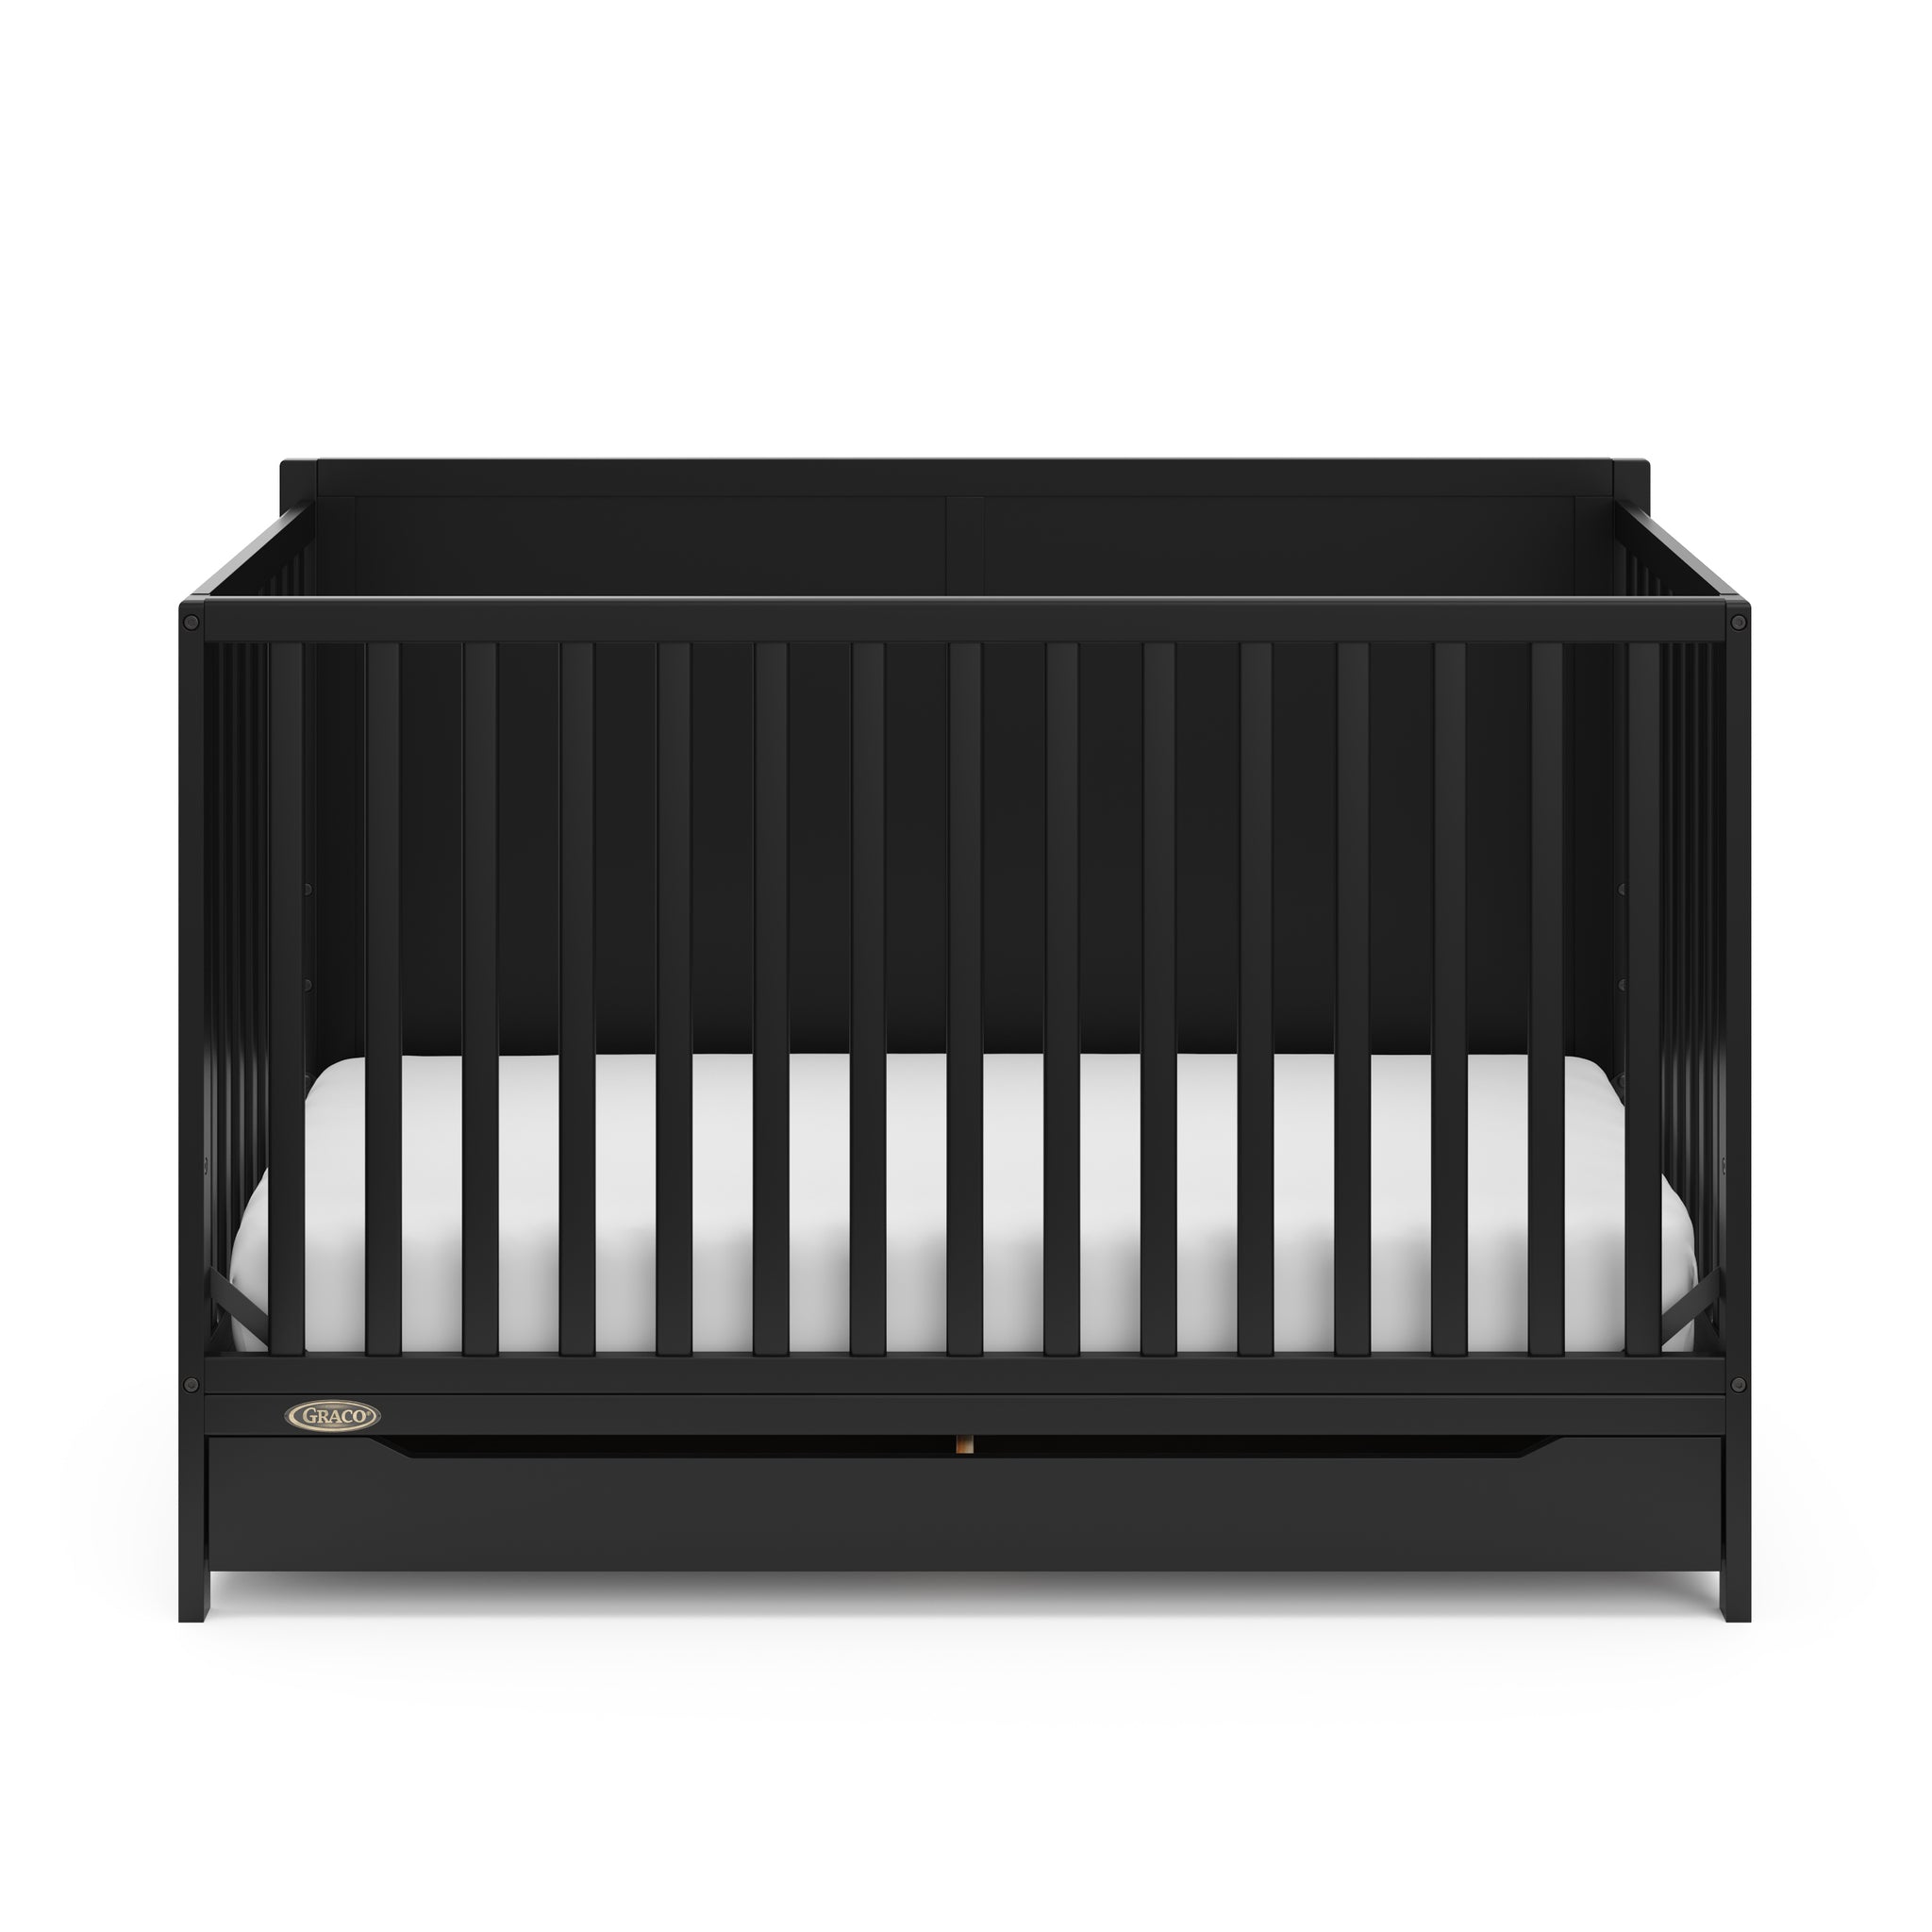 front view of black crib with drawer